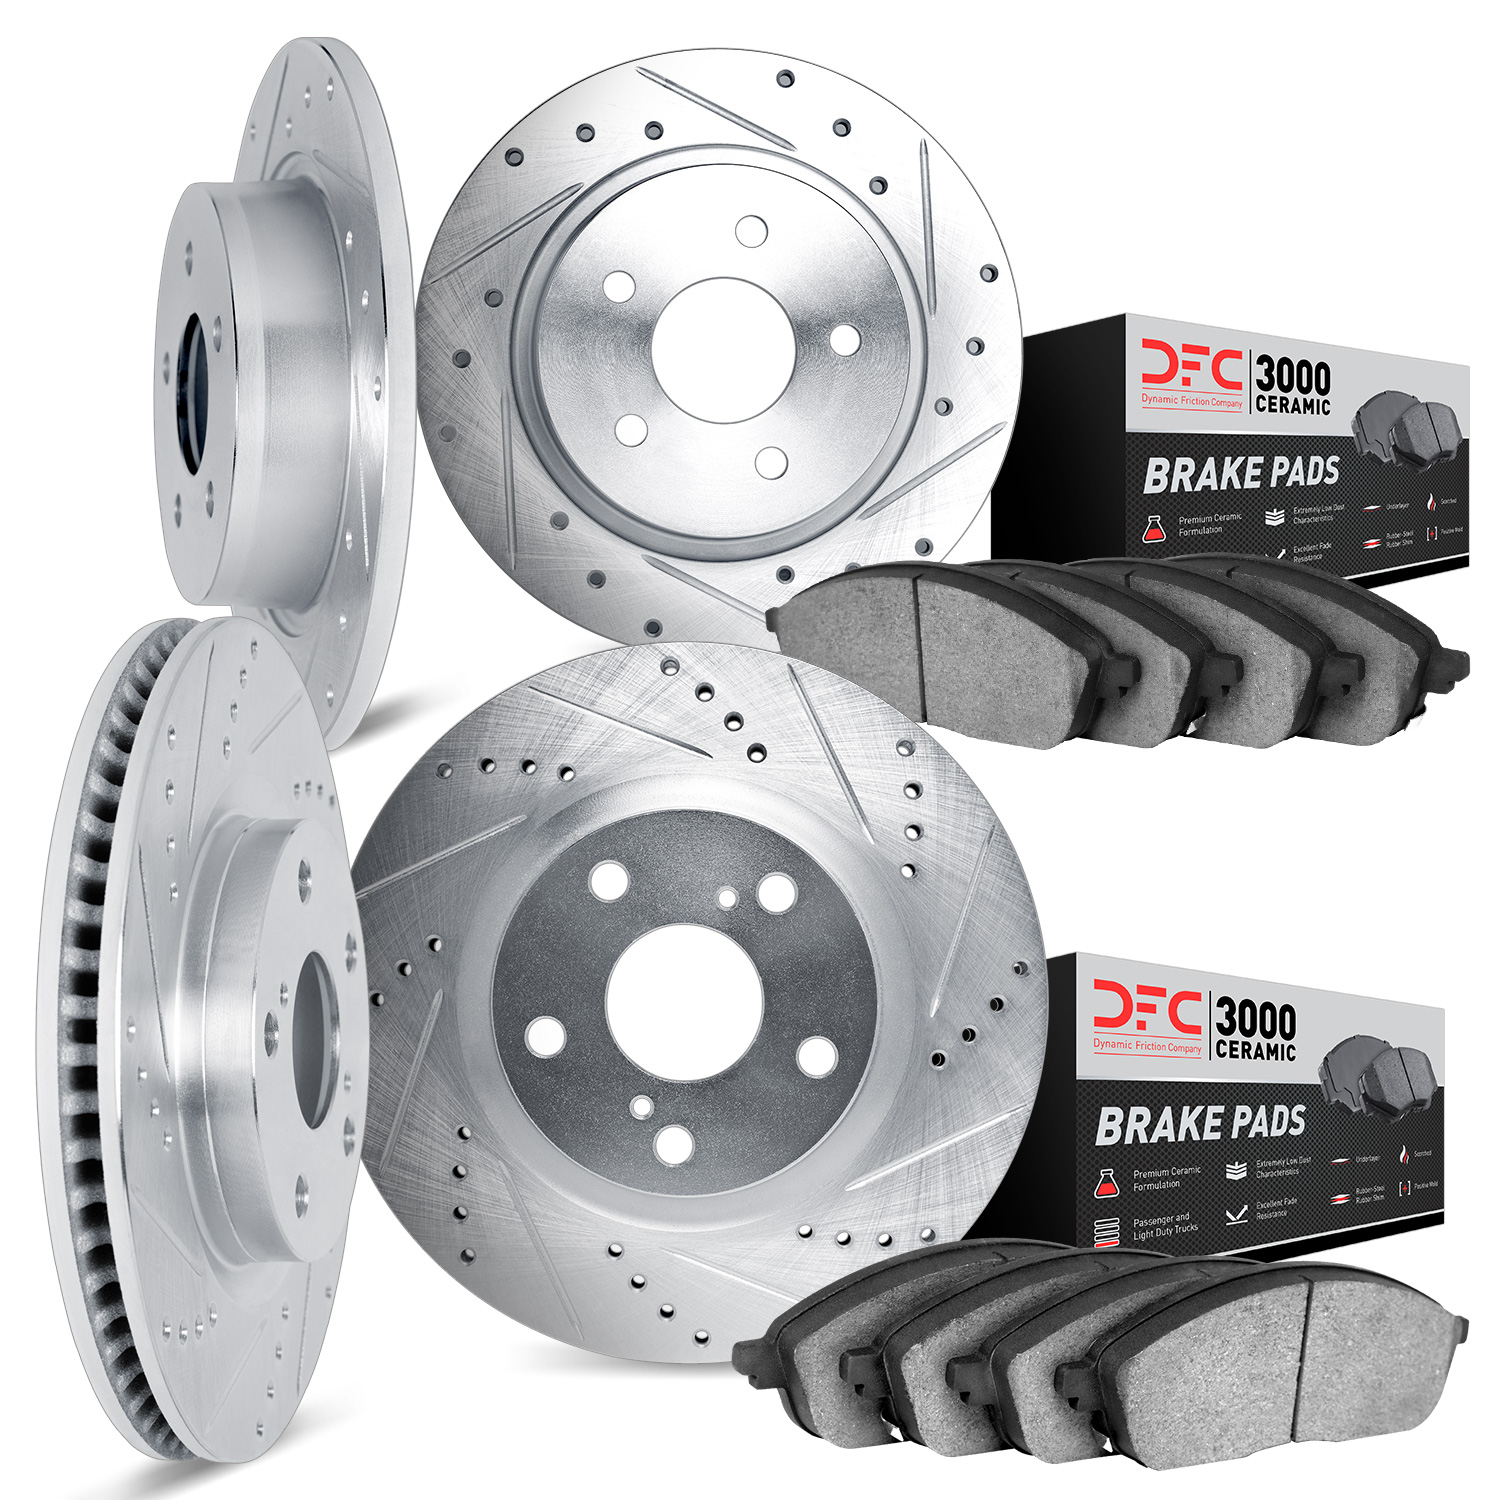 7304-80018 Drilled/Slotted Brake Rotor with 3000-Series Ceramic Brake Pads Kit [Silver], 2001-2002 Ford/Lincoln/Mercury/Mazda, P